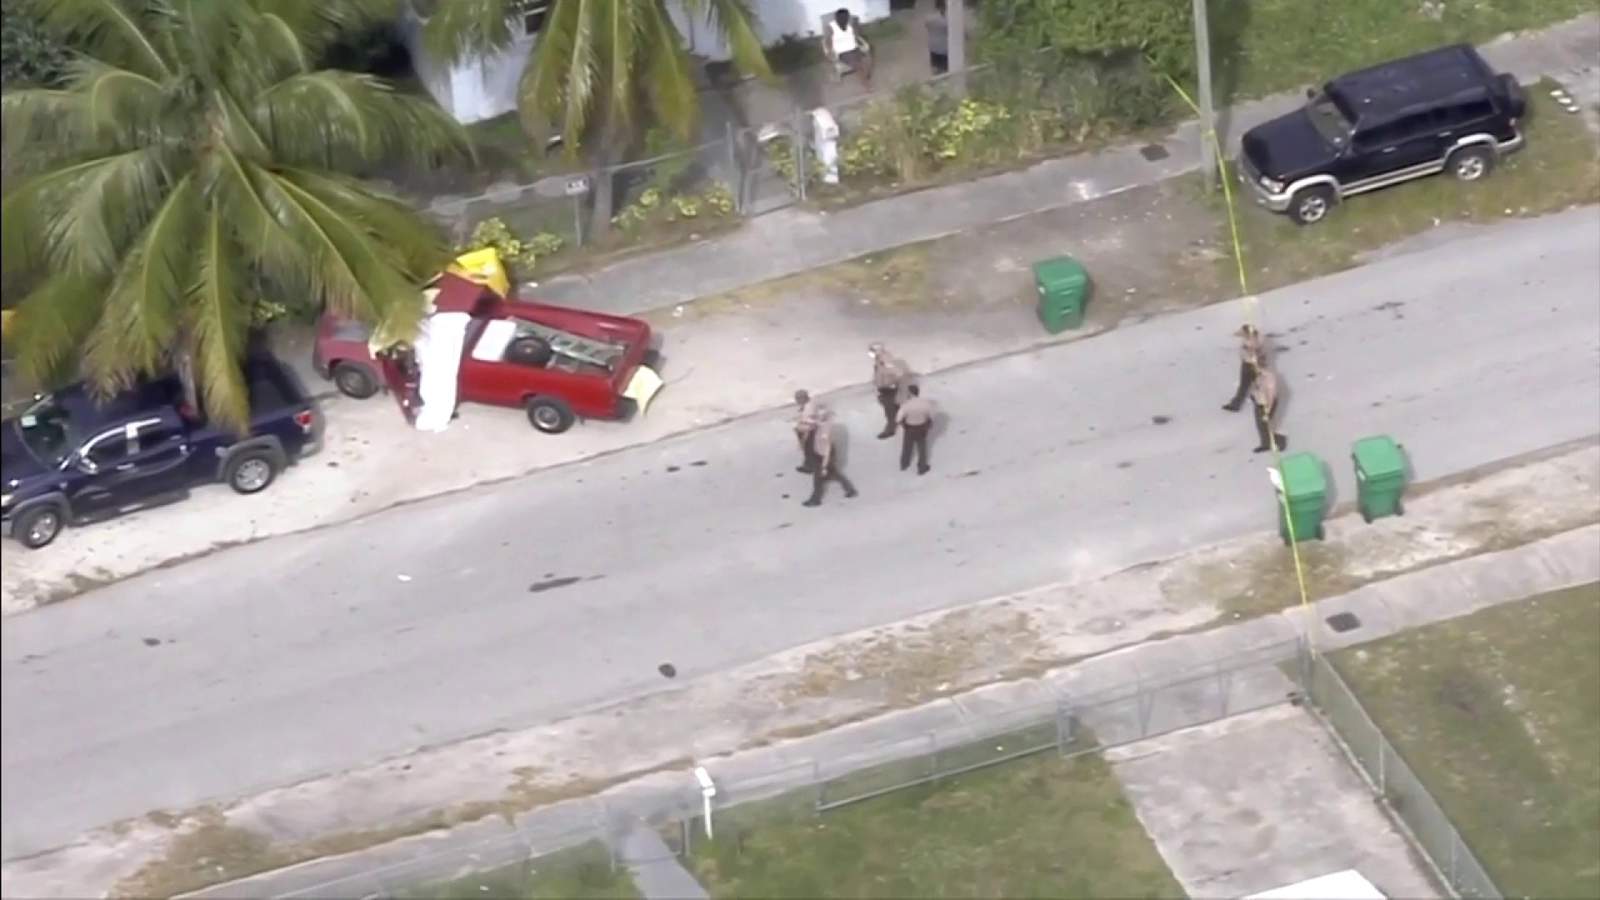 Man found shot to death inside pickup truck in Southwest Miami-Dade residential neighborhood